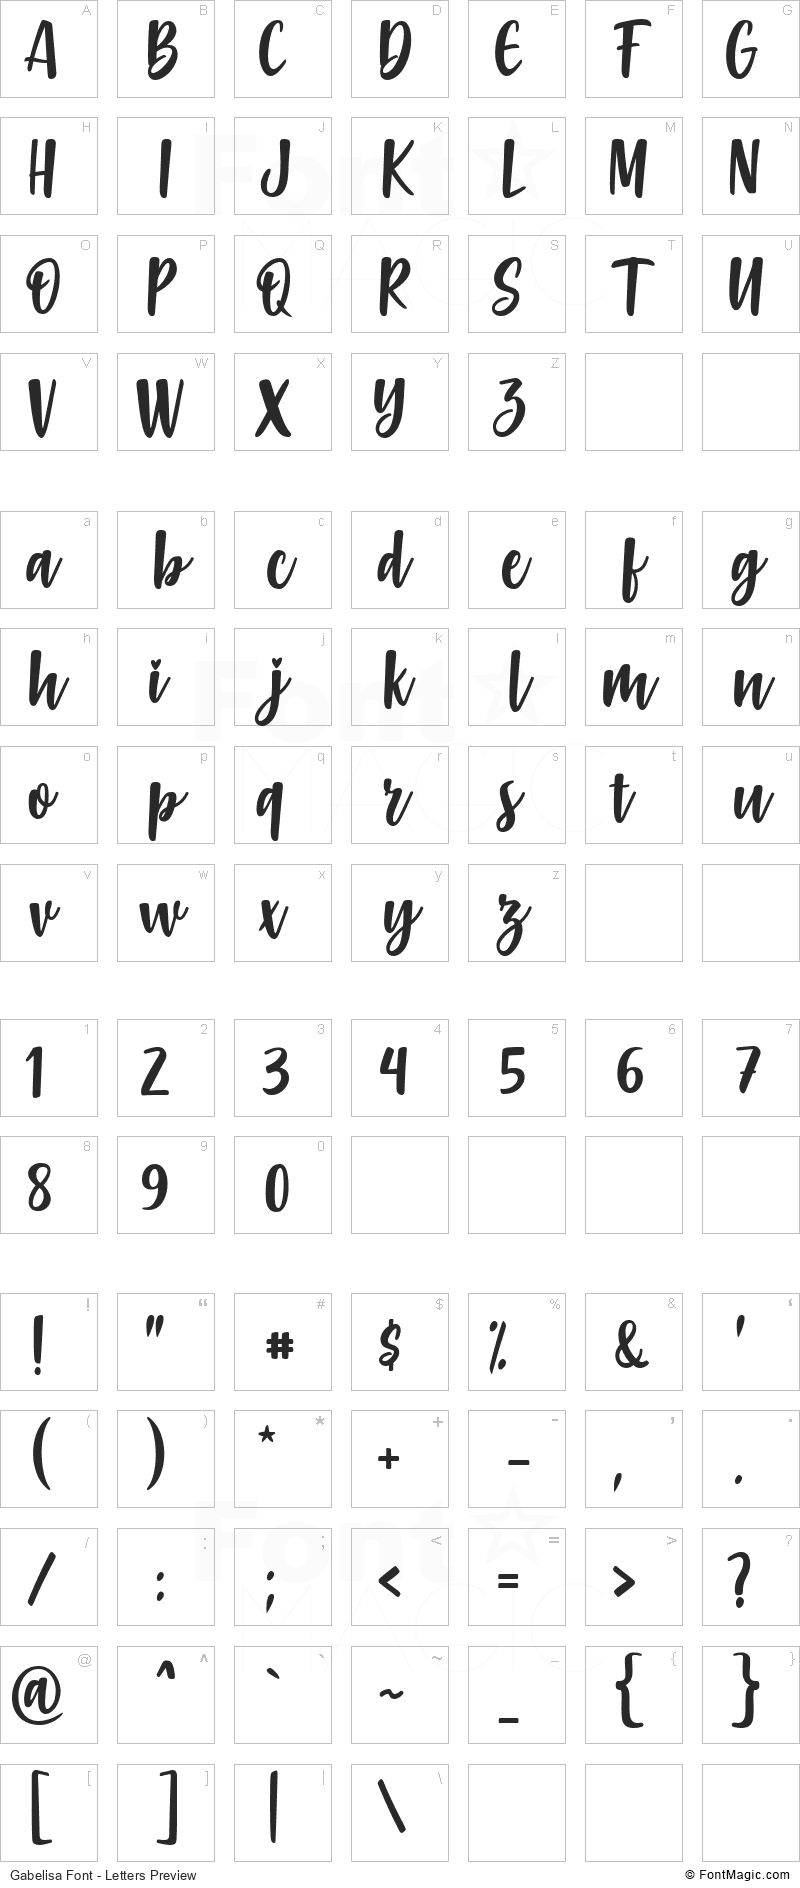 Gabelisa Font - All Latters Preview Chart